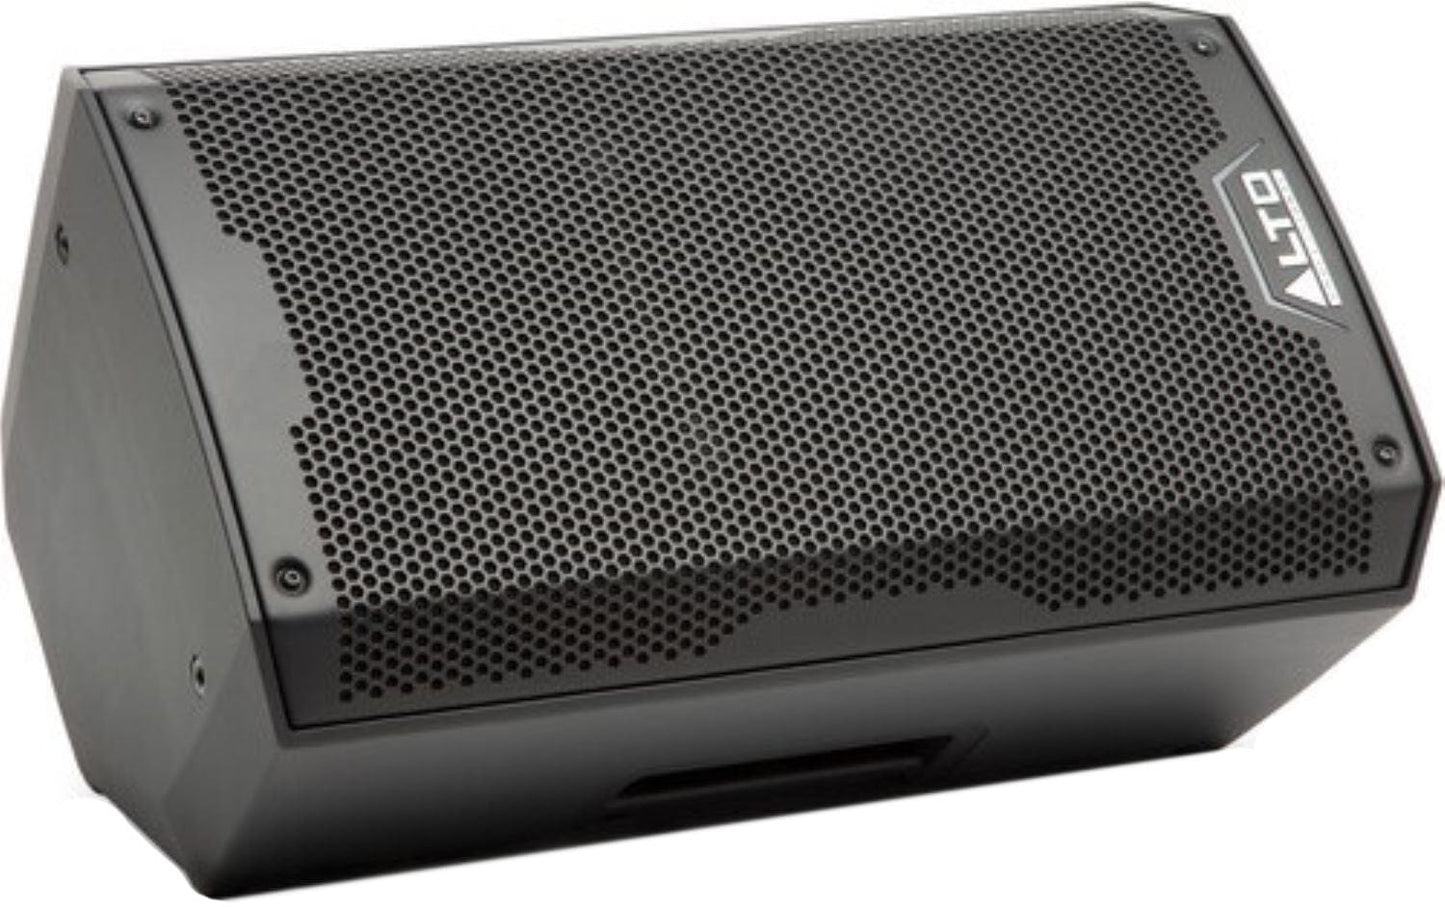 Alto Professional TS408 2000W 8 Inch 2-Way Powered Speaker - PSSL ProSound and Stage Lighting